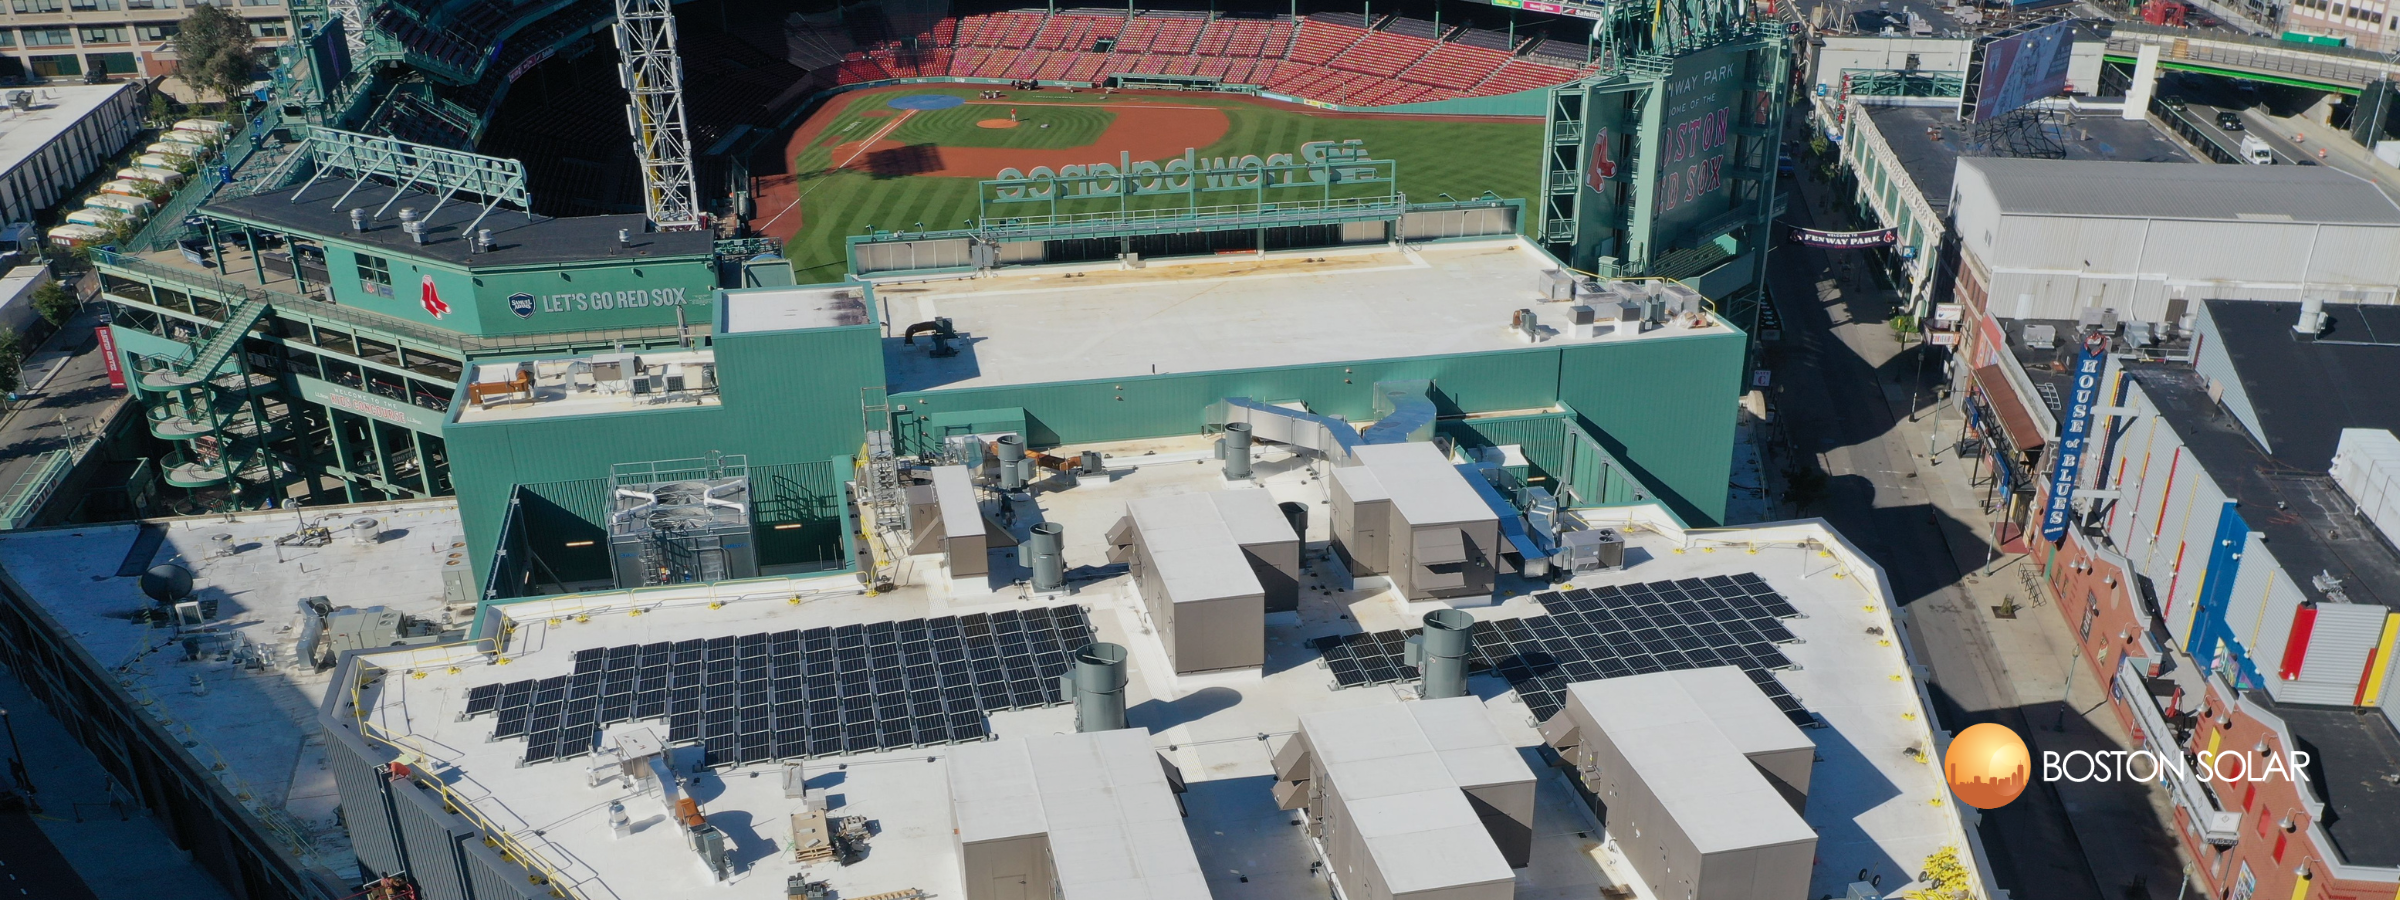 A 297-Panel Solar Energy System for MGM Music Hall at Fenway.